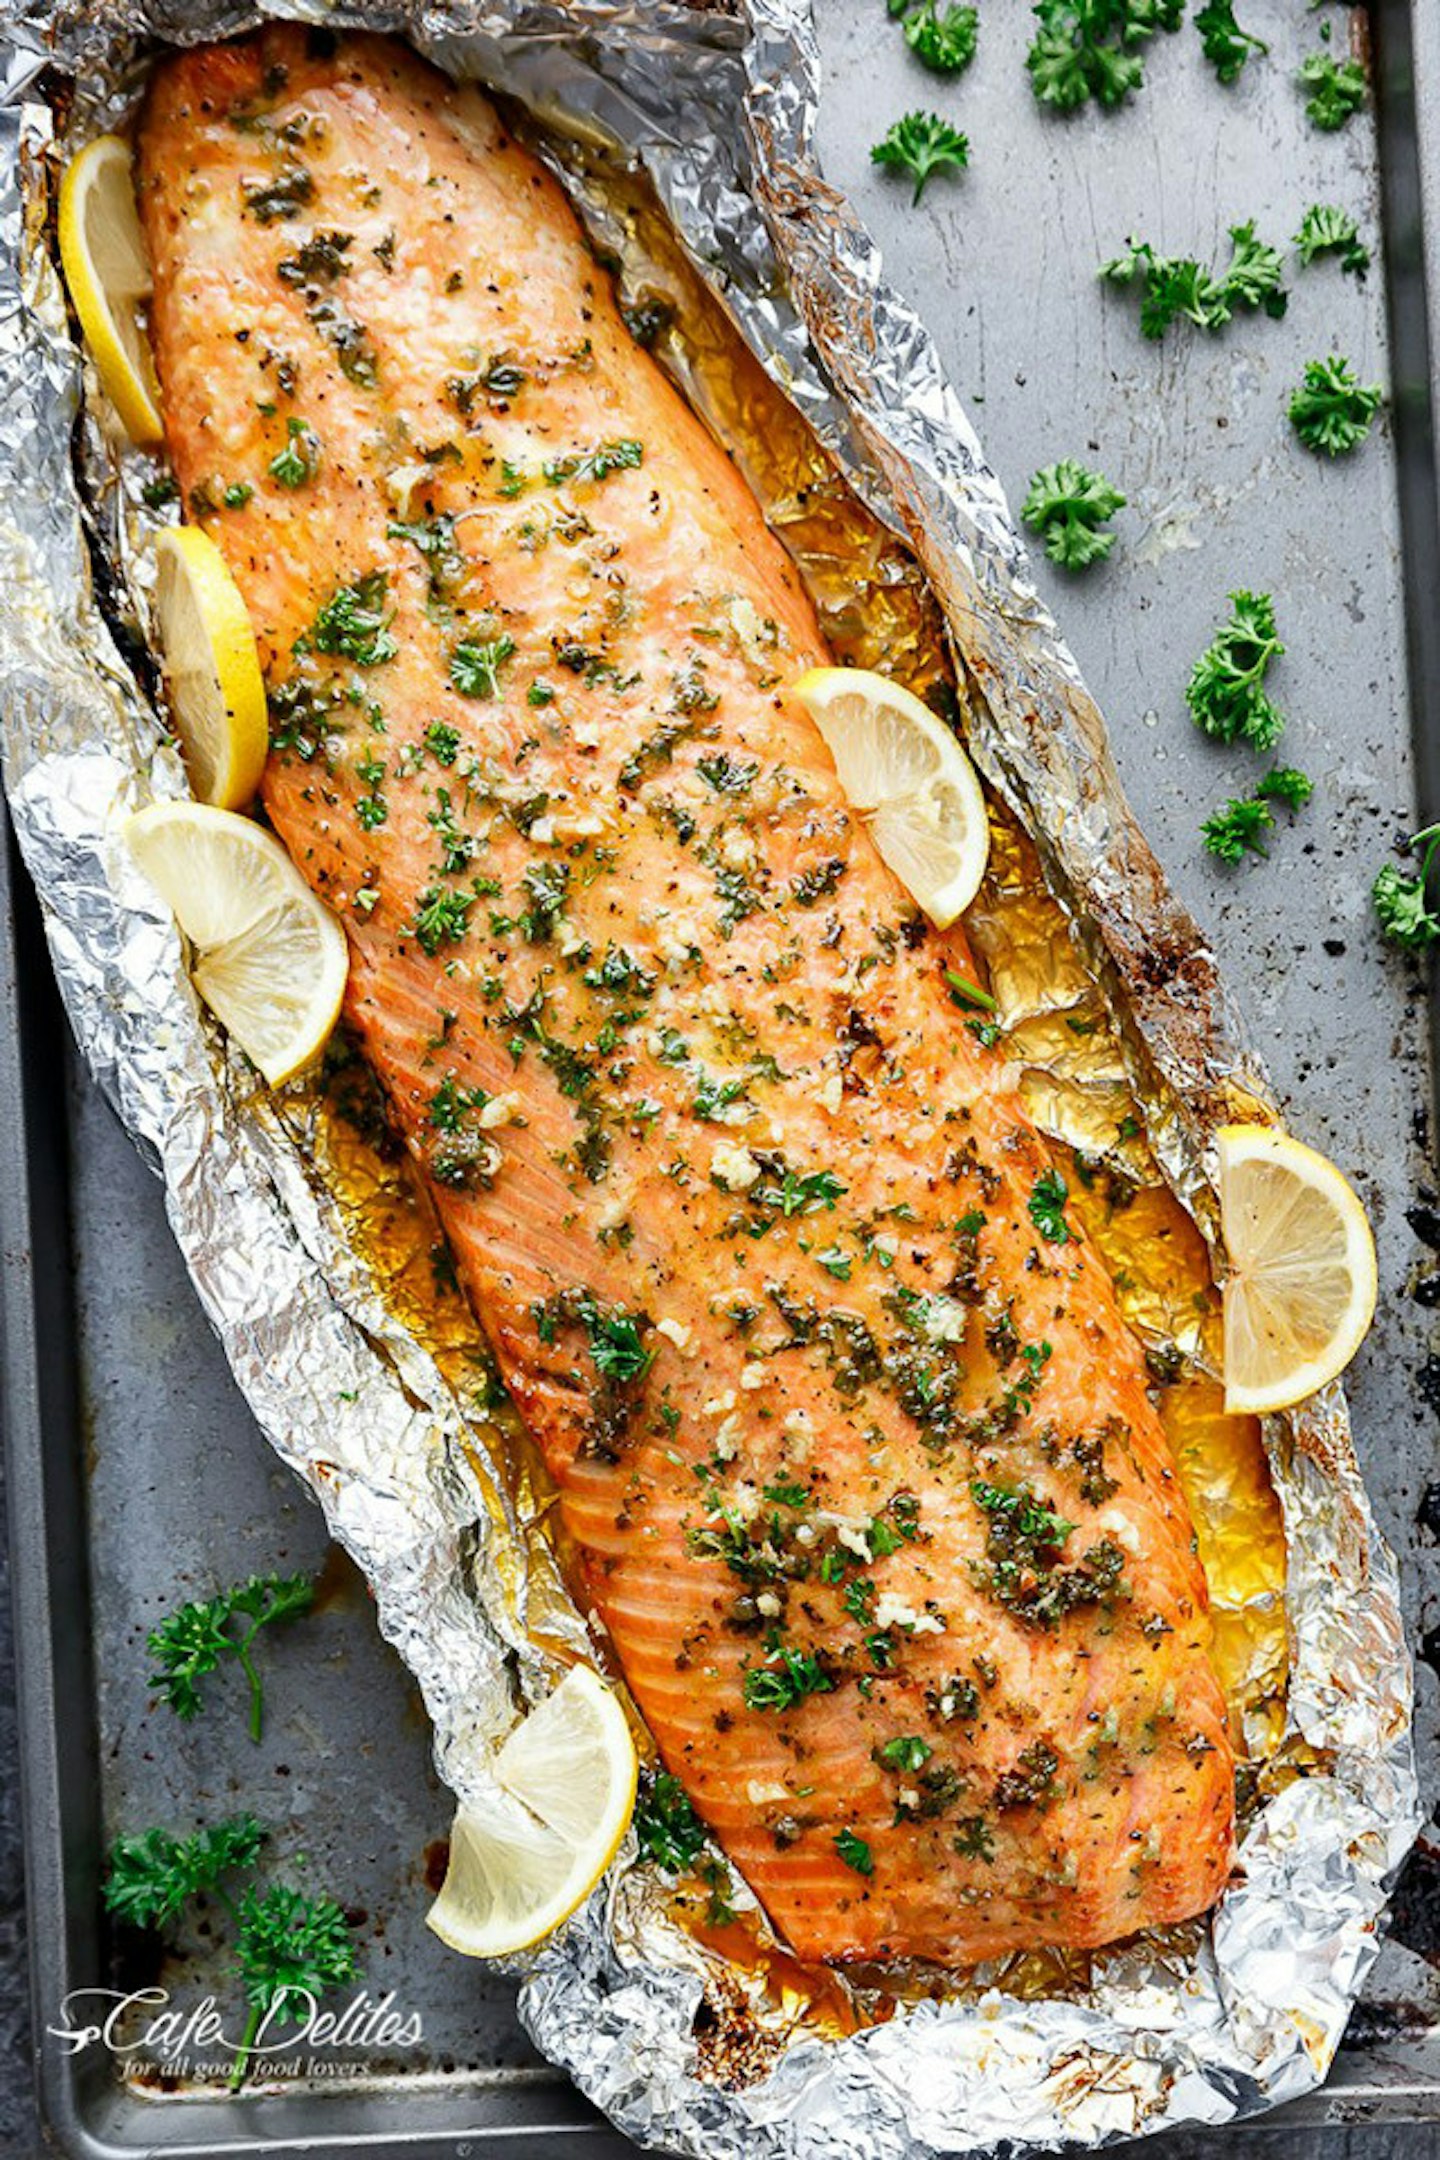 7 Salmon Recipes To Make A Healthy Dish To Eat For Your Fancy Dinner